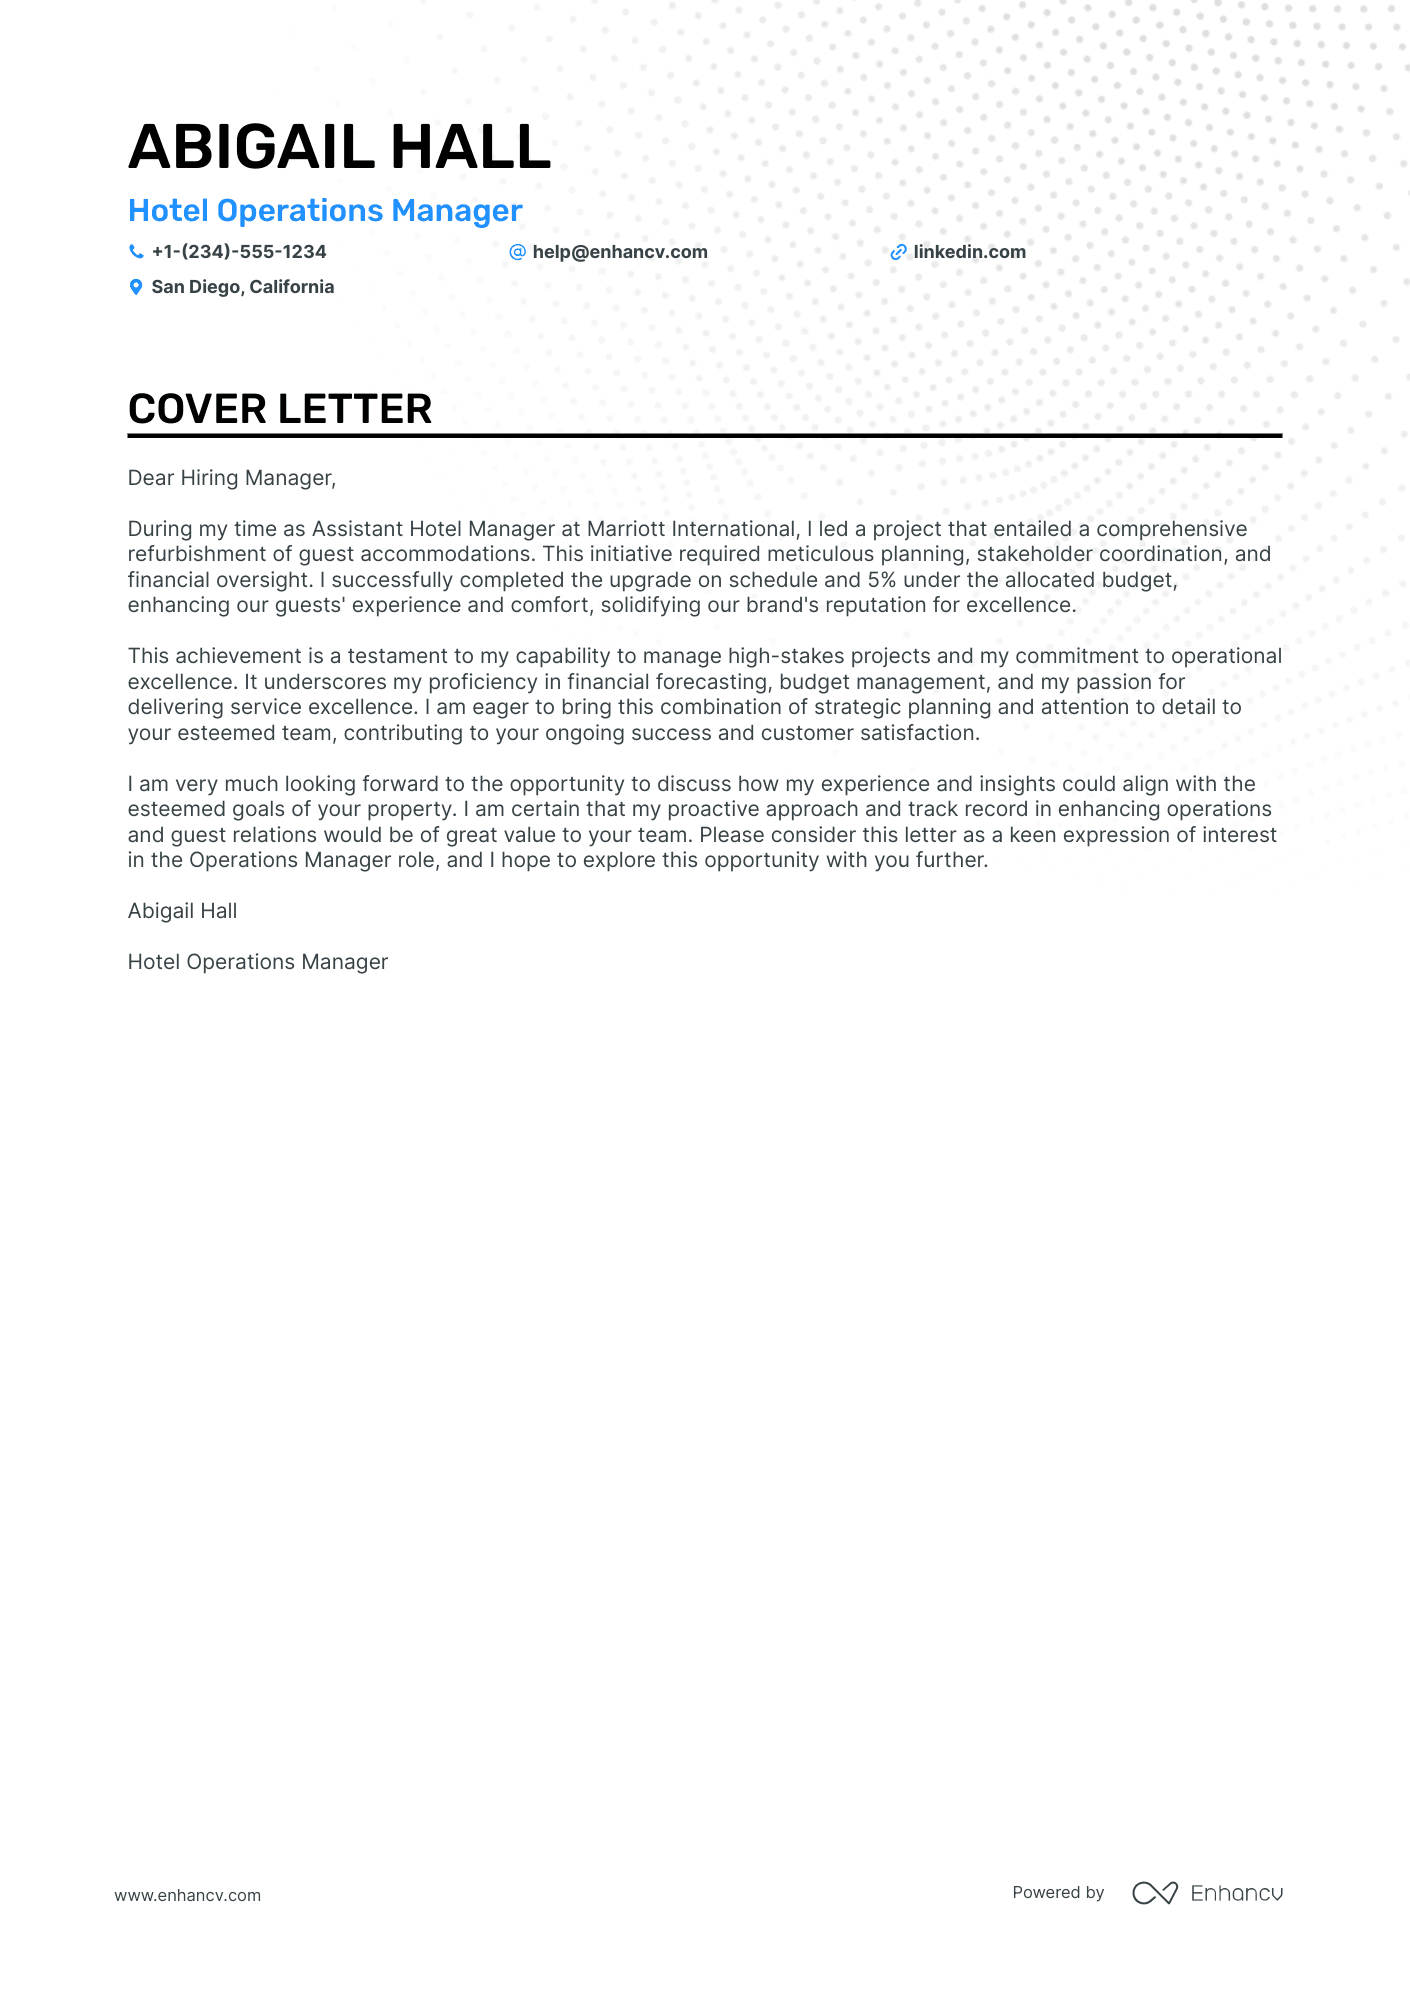 Hotel Operations Manager cover letter